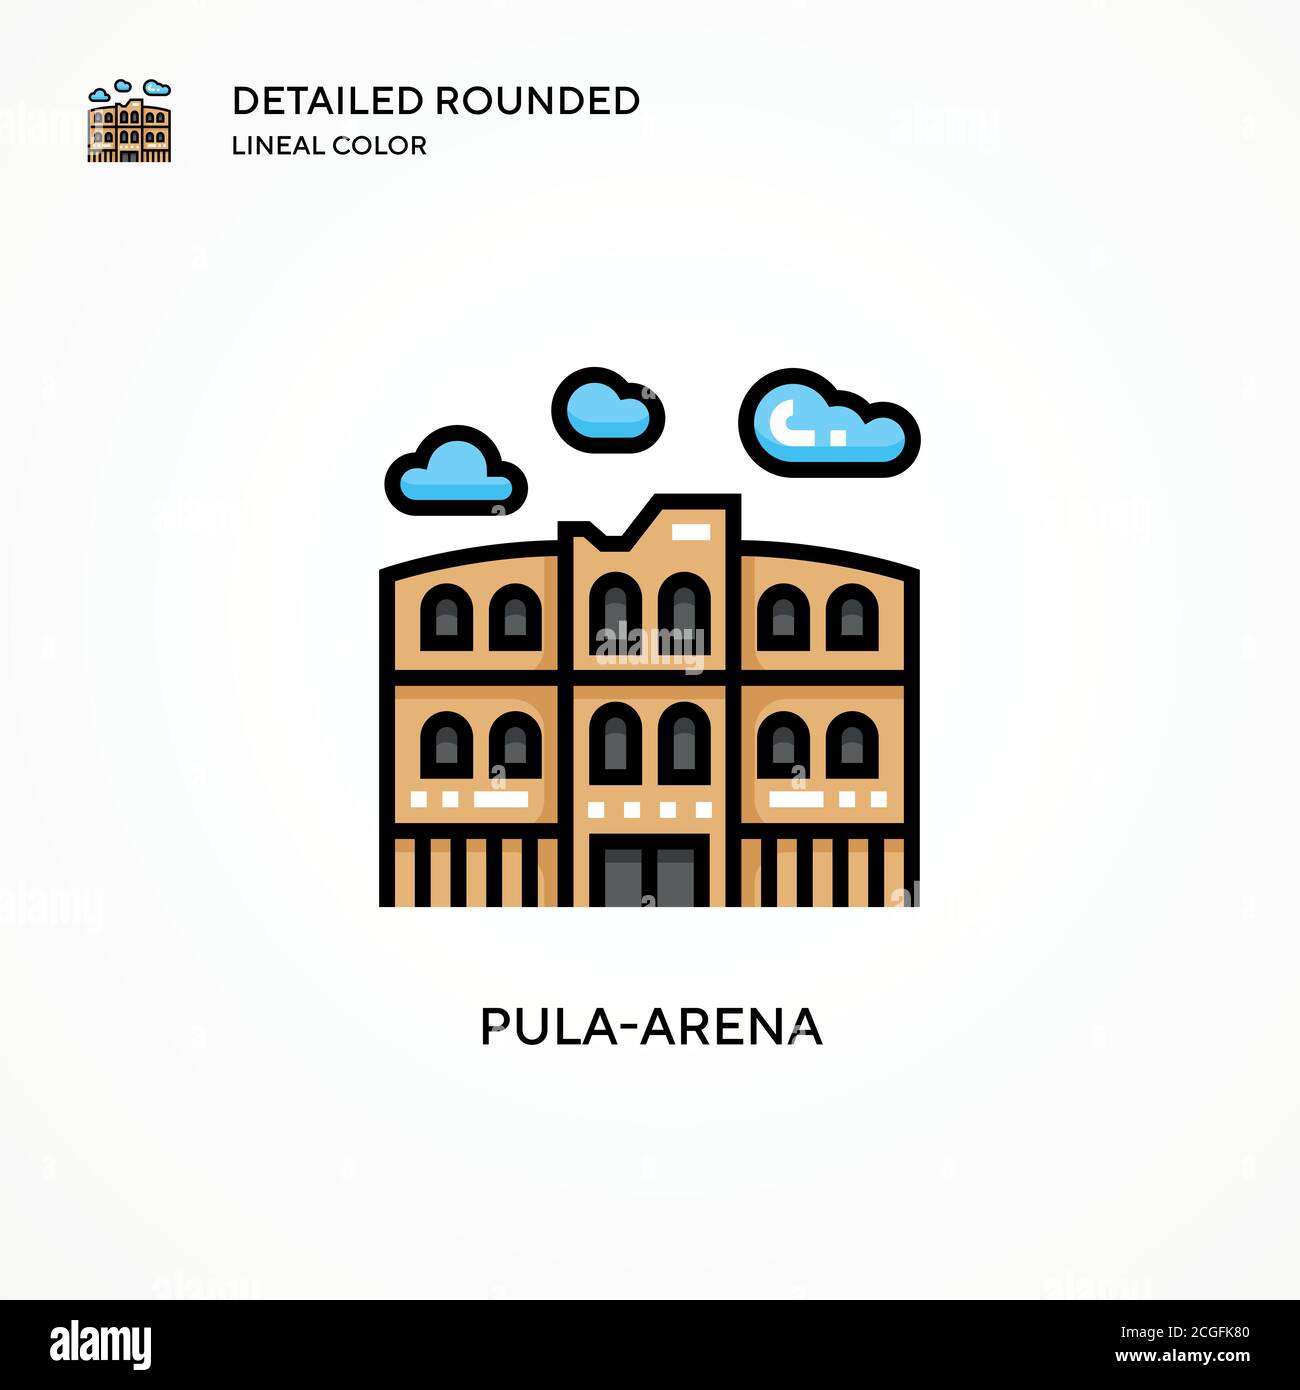 Pula-arena vector icon. Modern vector illustration concepts. Easy to edit and customize. Stock Vector